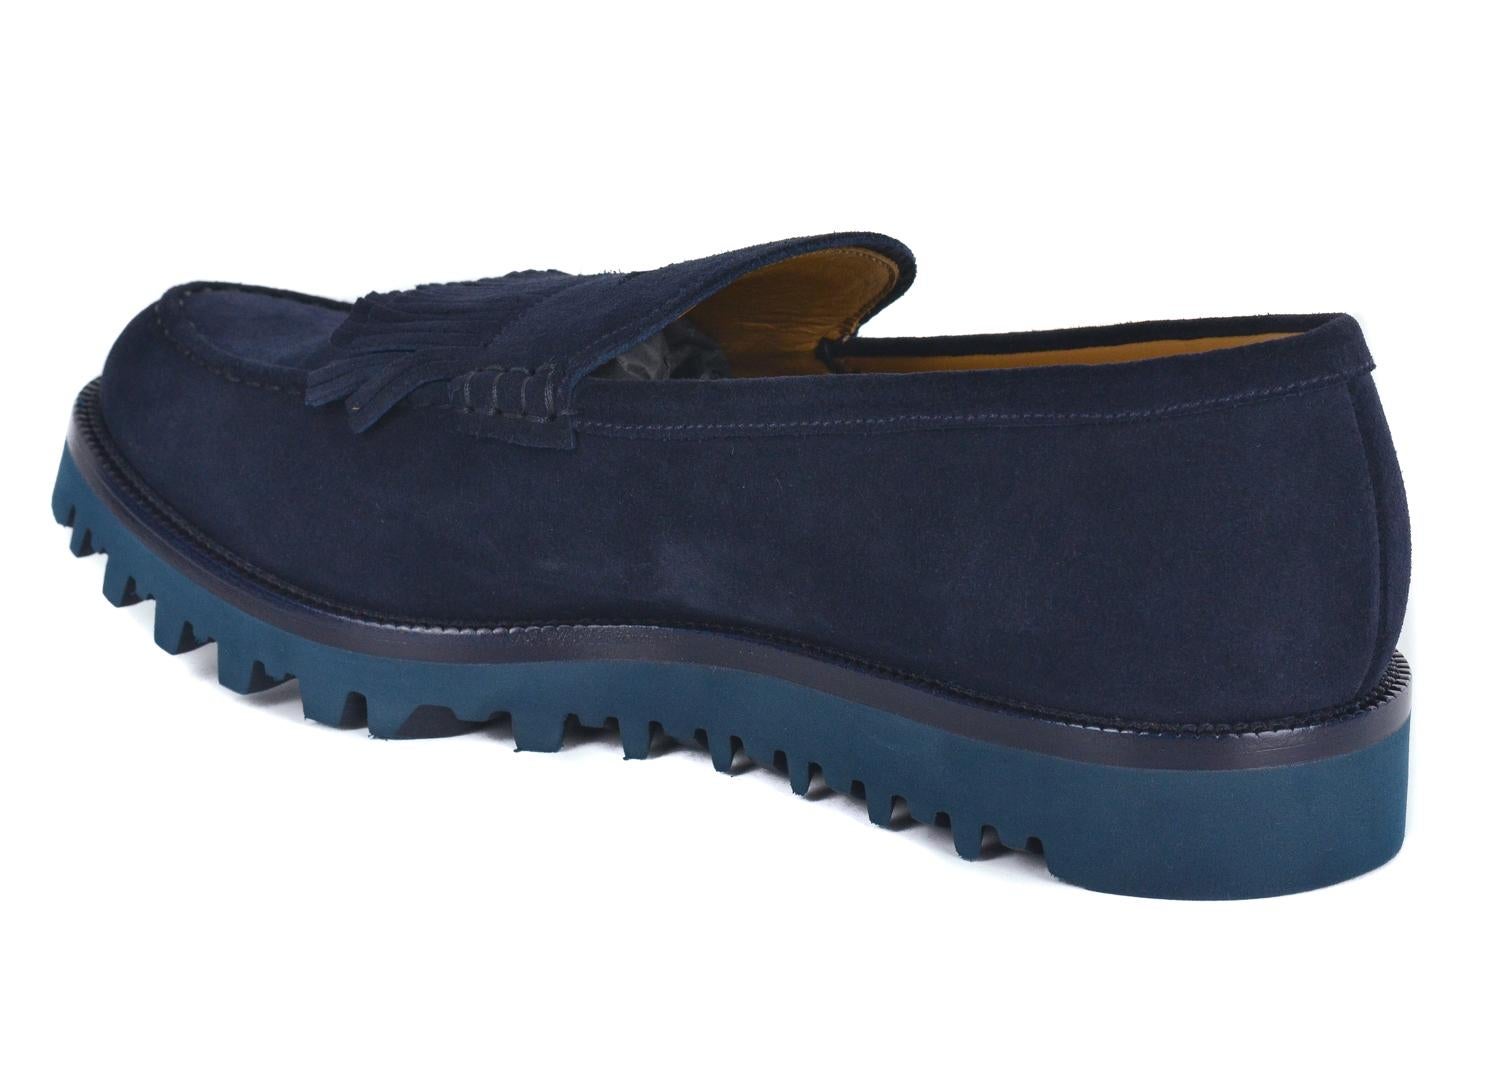 Giorgio Armani Mens Navy Suede Kiltie Platform Loafers In New Condition For Sale In Brooklyn, NY